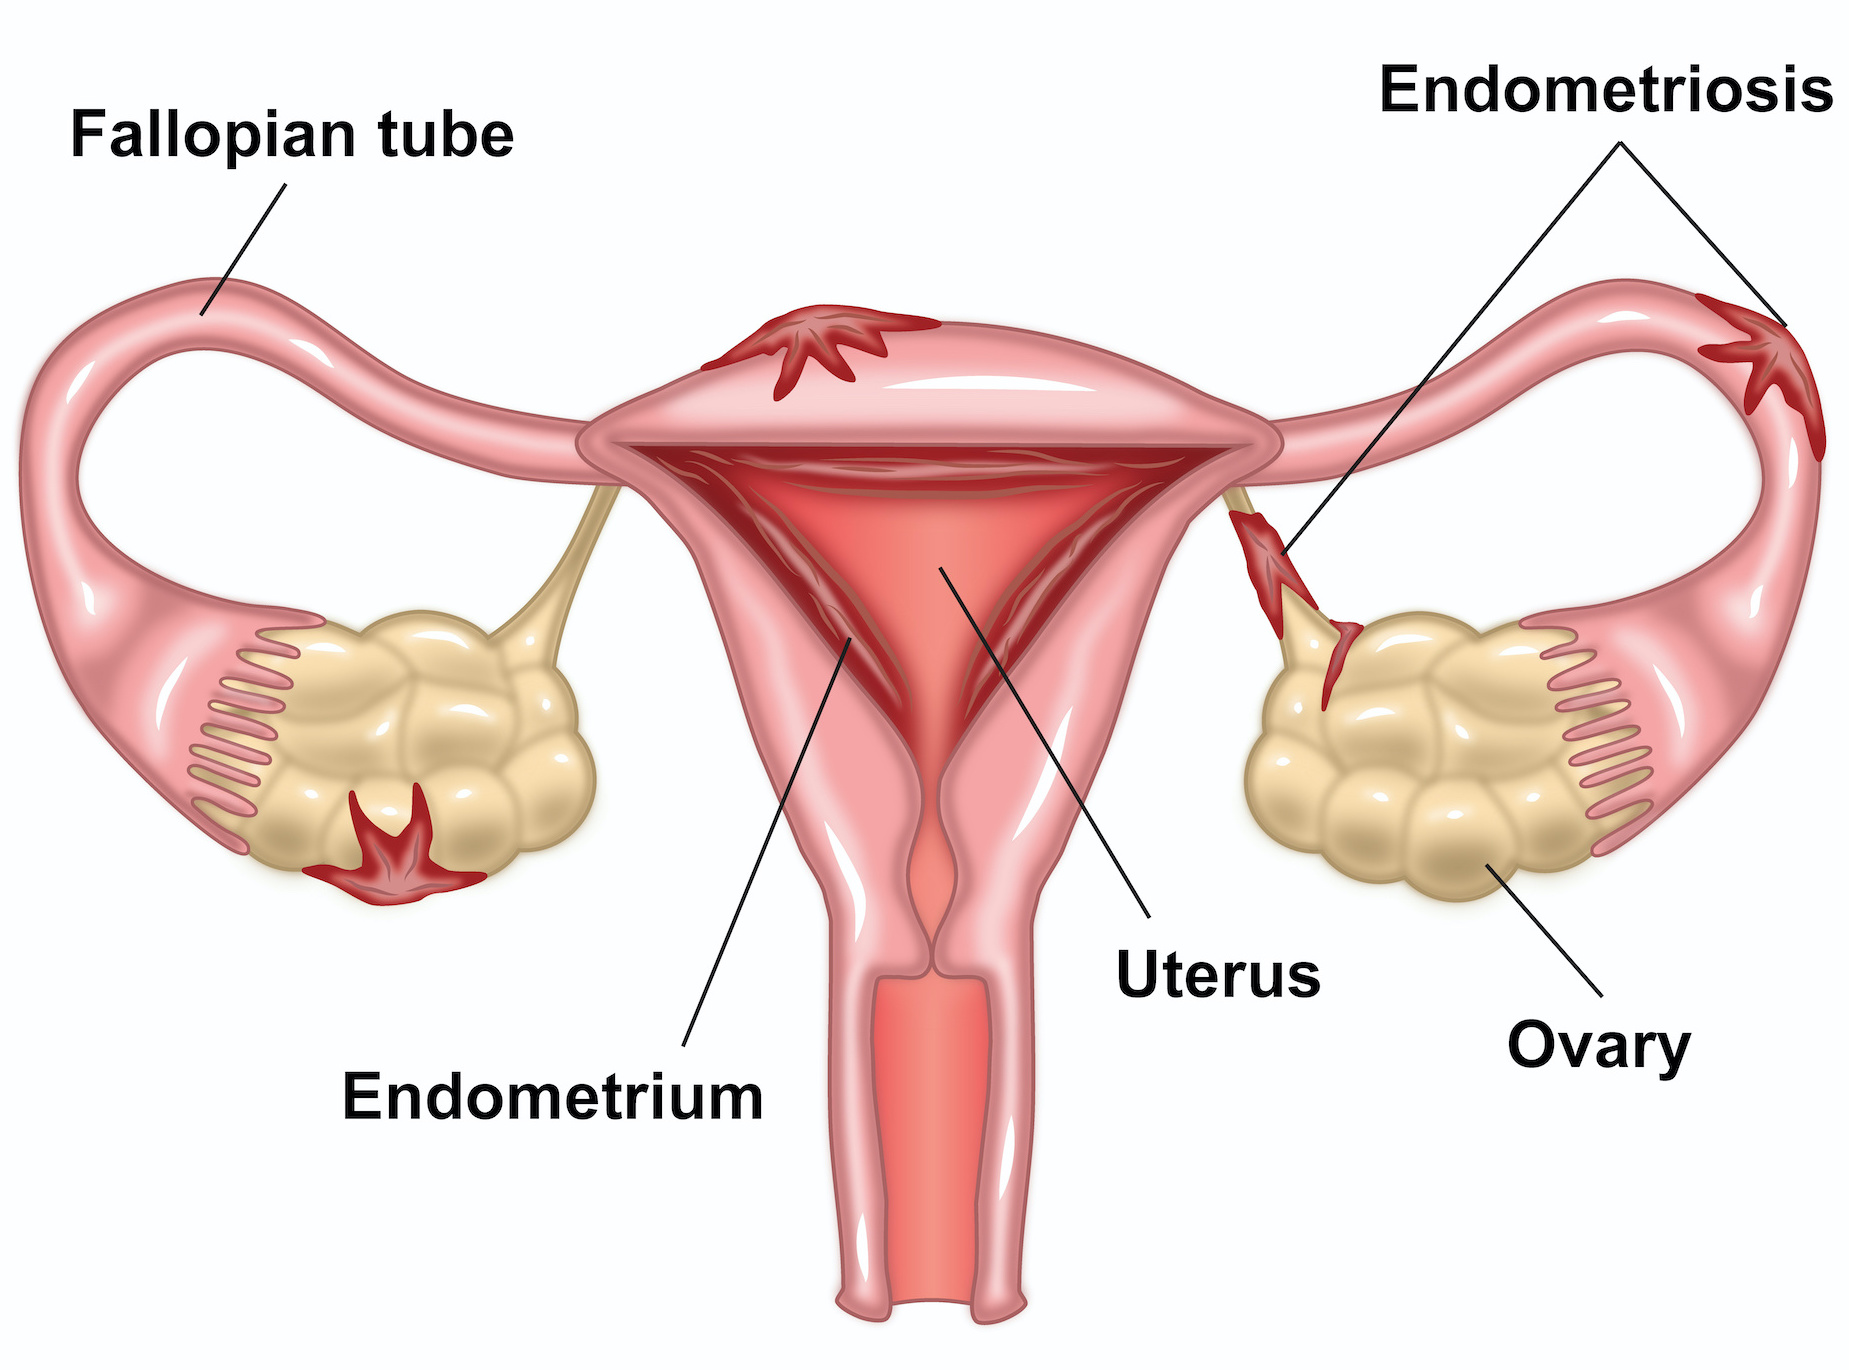 Endometriosis is a chronic condition where tissue similar to the lining inside the uterus grows outside of it, causing pain, inflammation, and sometimes infertility. While some women may experience symptoms like painful periods, fatigue, and intense pelvic pain, others may be asymptomatic (known as “silent endometriosis”), discovered only when facing infertility issues. 